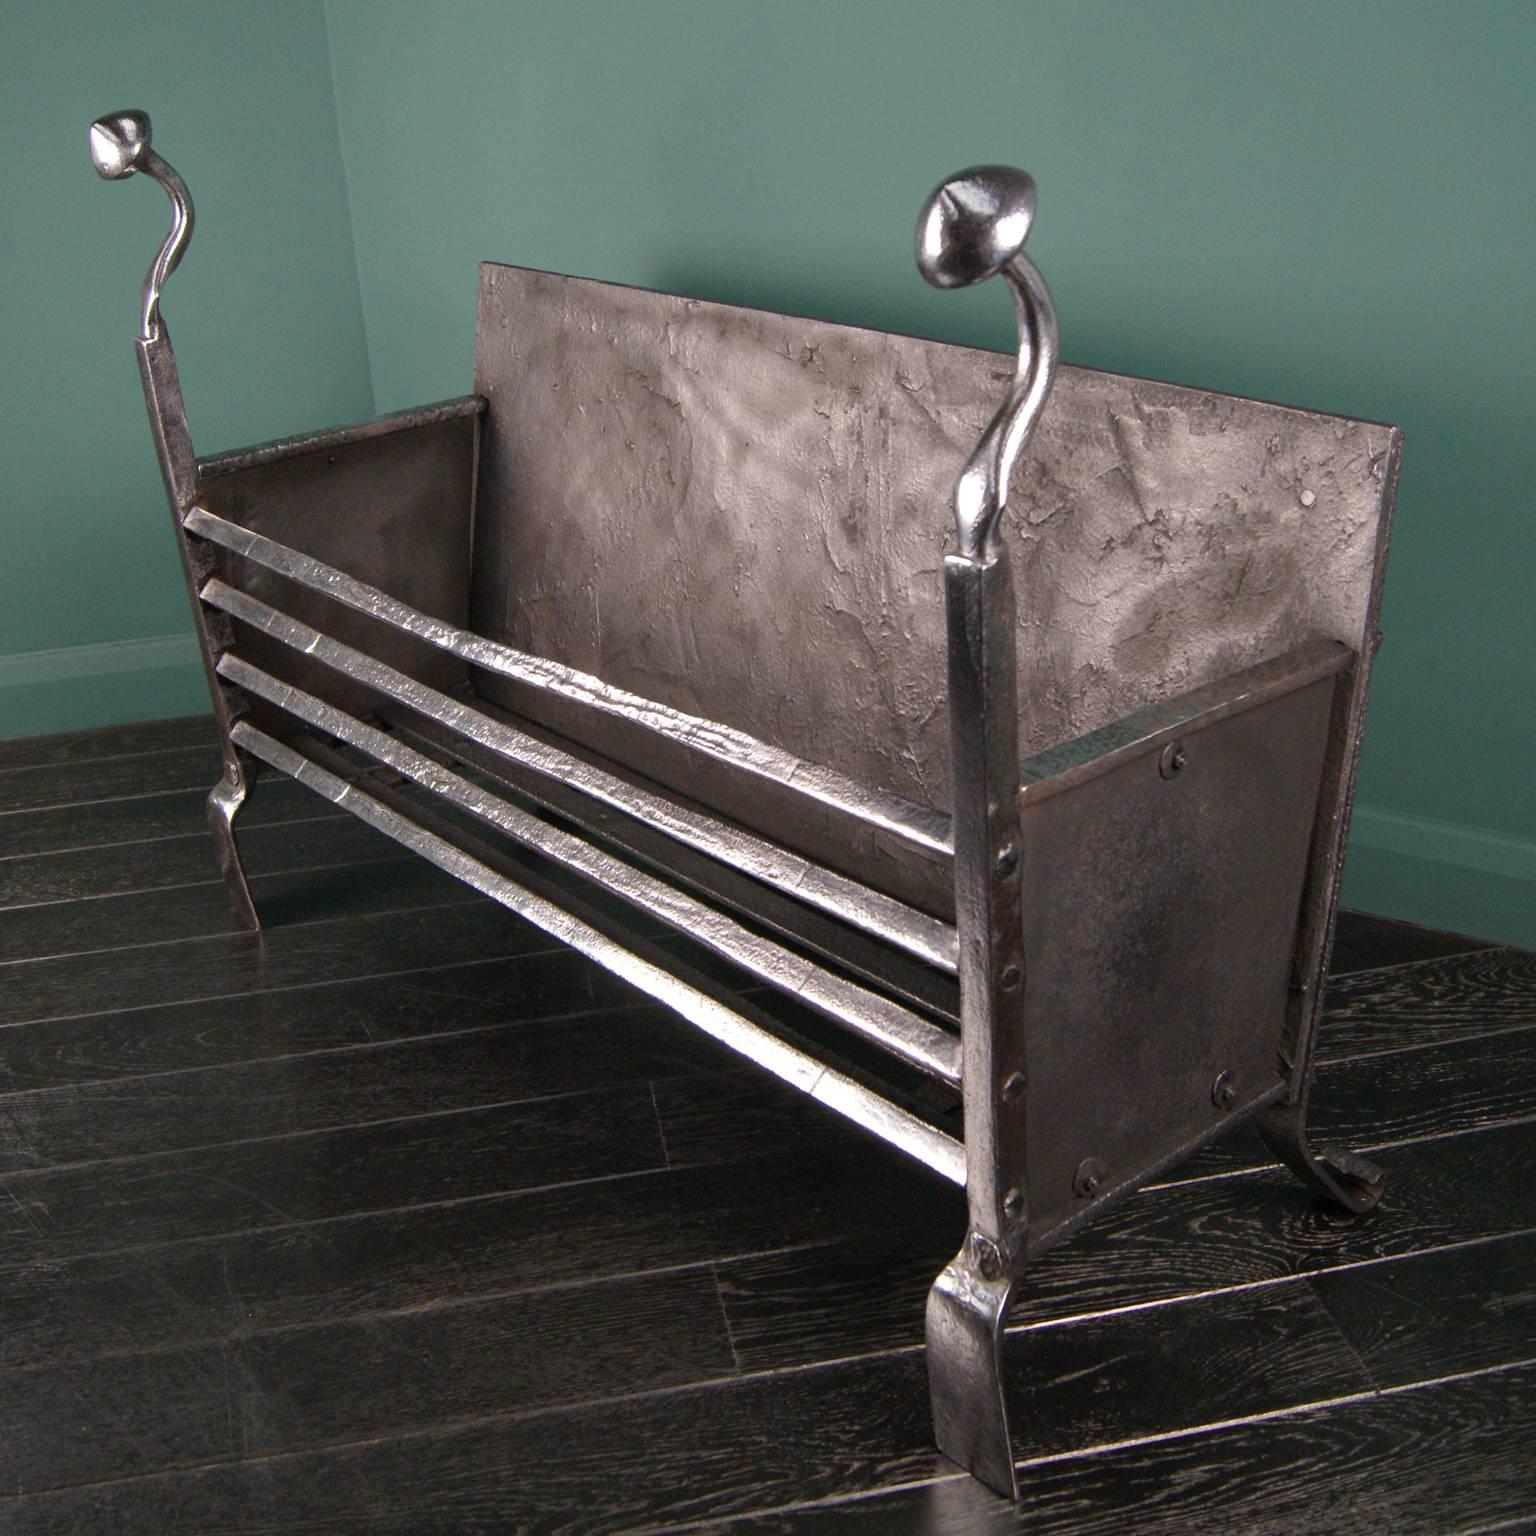 Large polished wrought iron 18th century fire basket with solid square fire bars, flared feet and wrought finials. Restored.